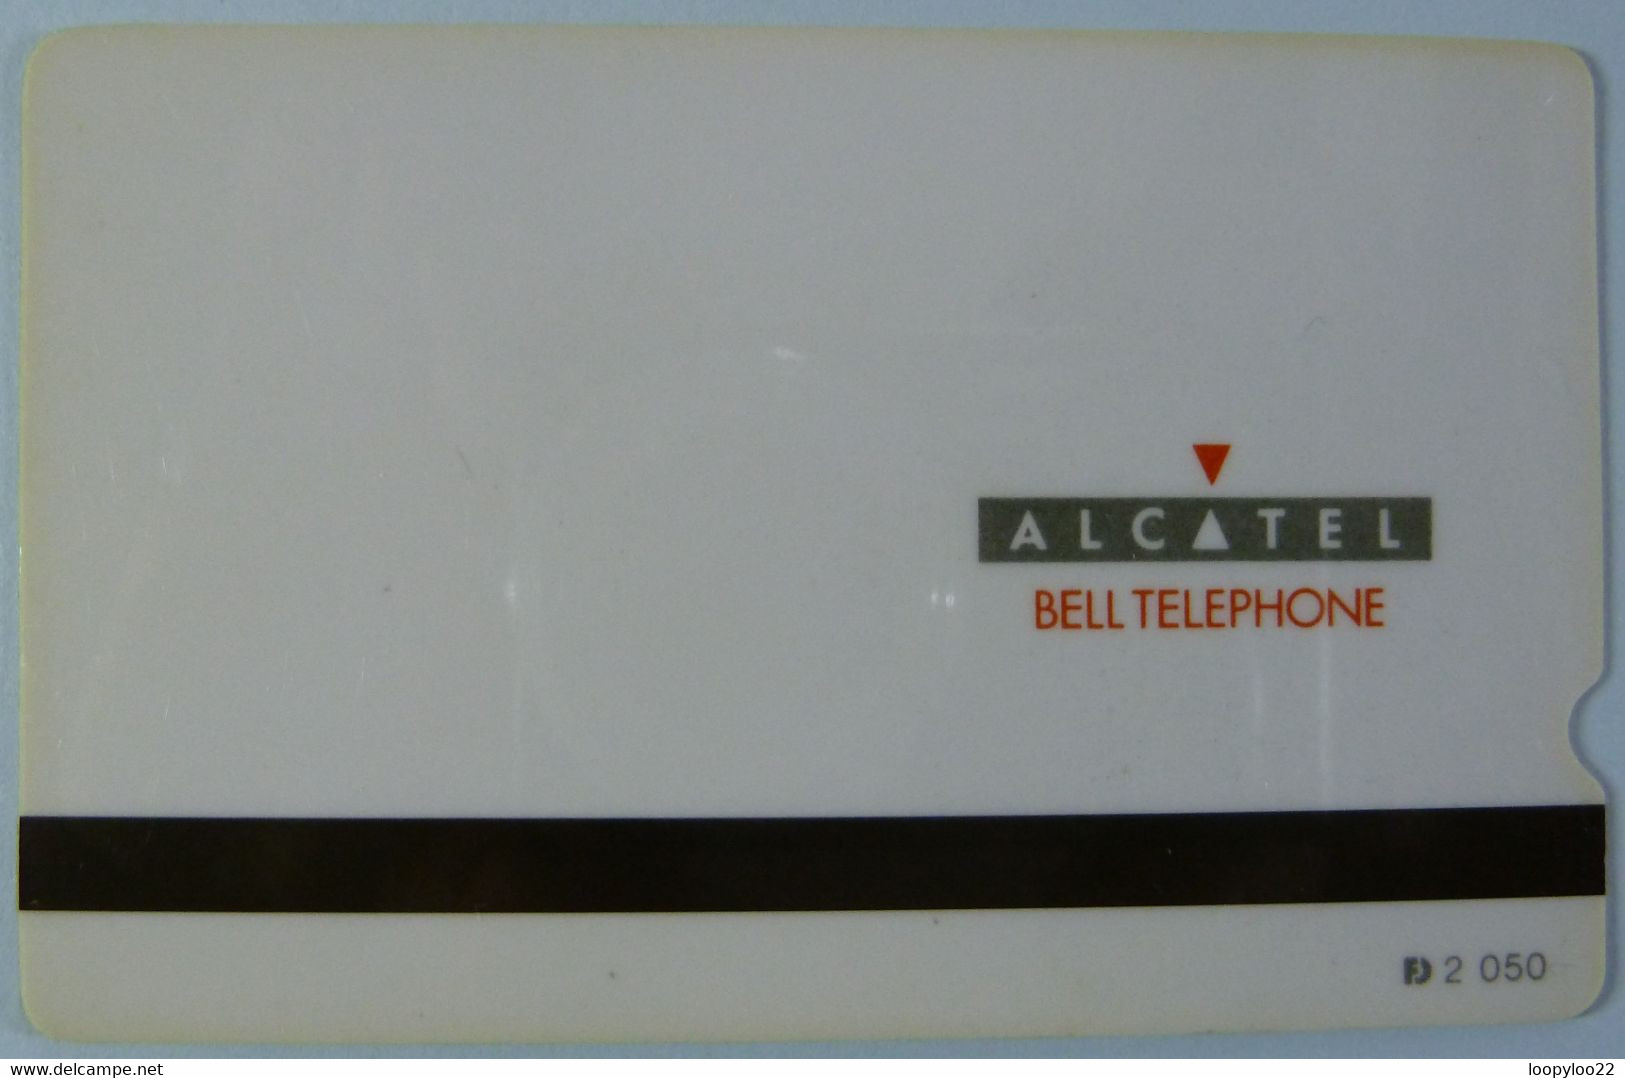 BELGIUM - Alcatel - Magnetic -Test - No Units - Bell Telephone - Rare - [3] Tests & Services